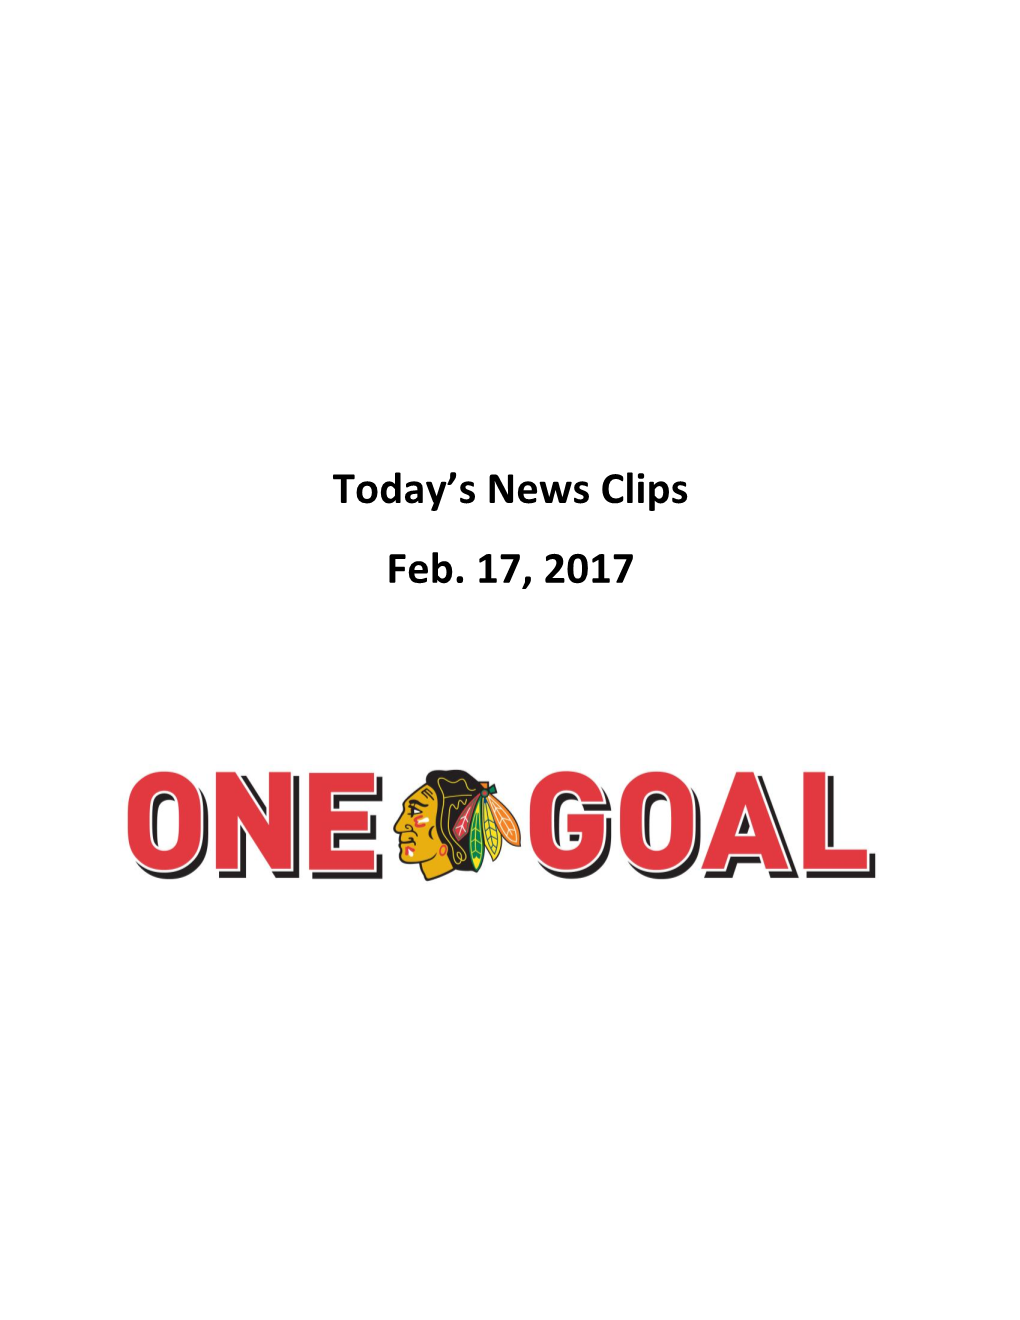 Today's News Clips Feb. 17, 2017